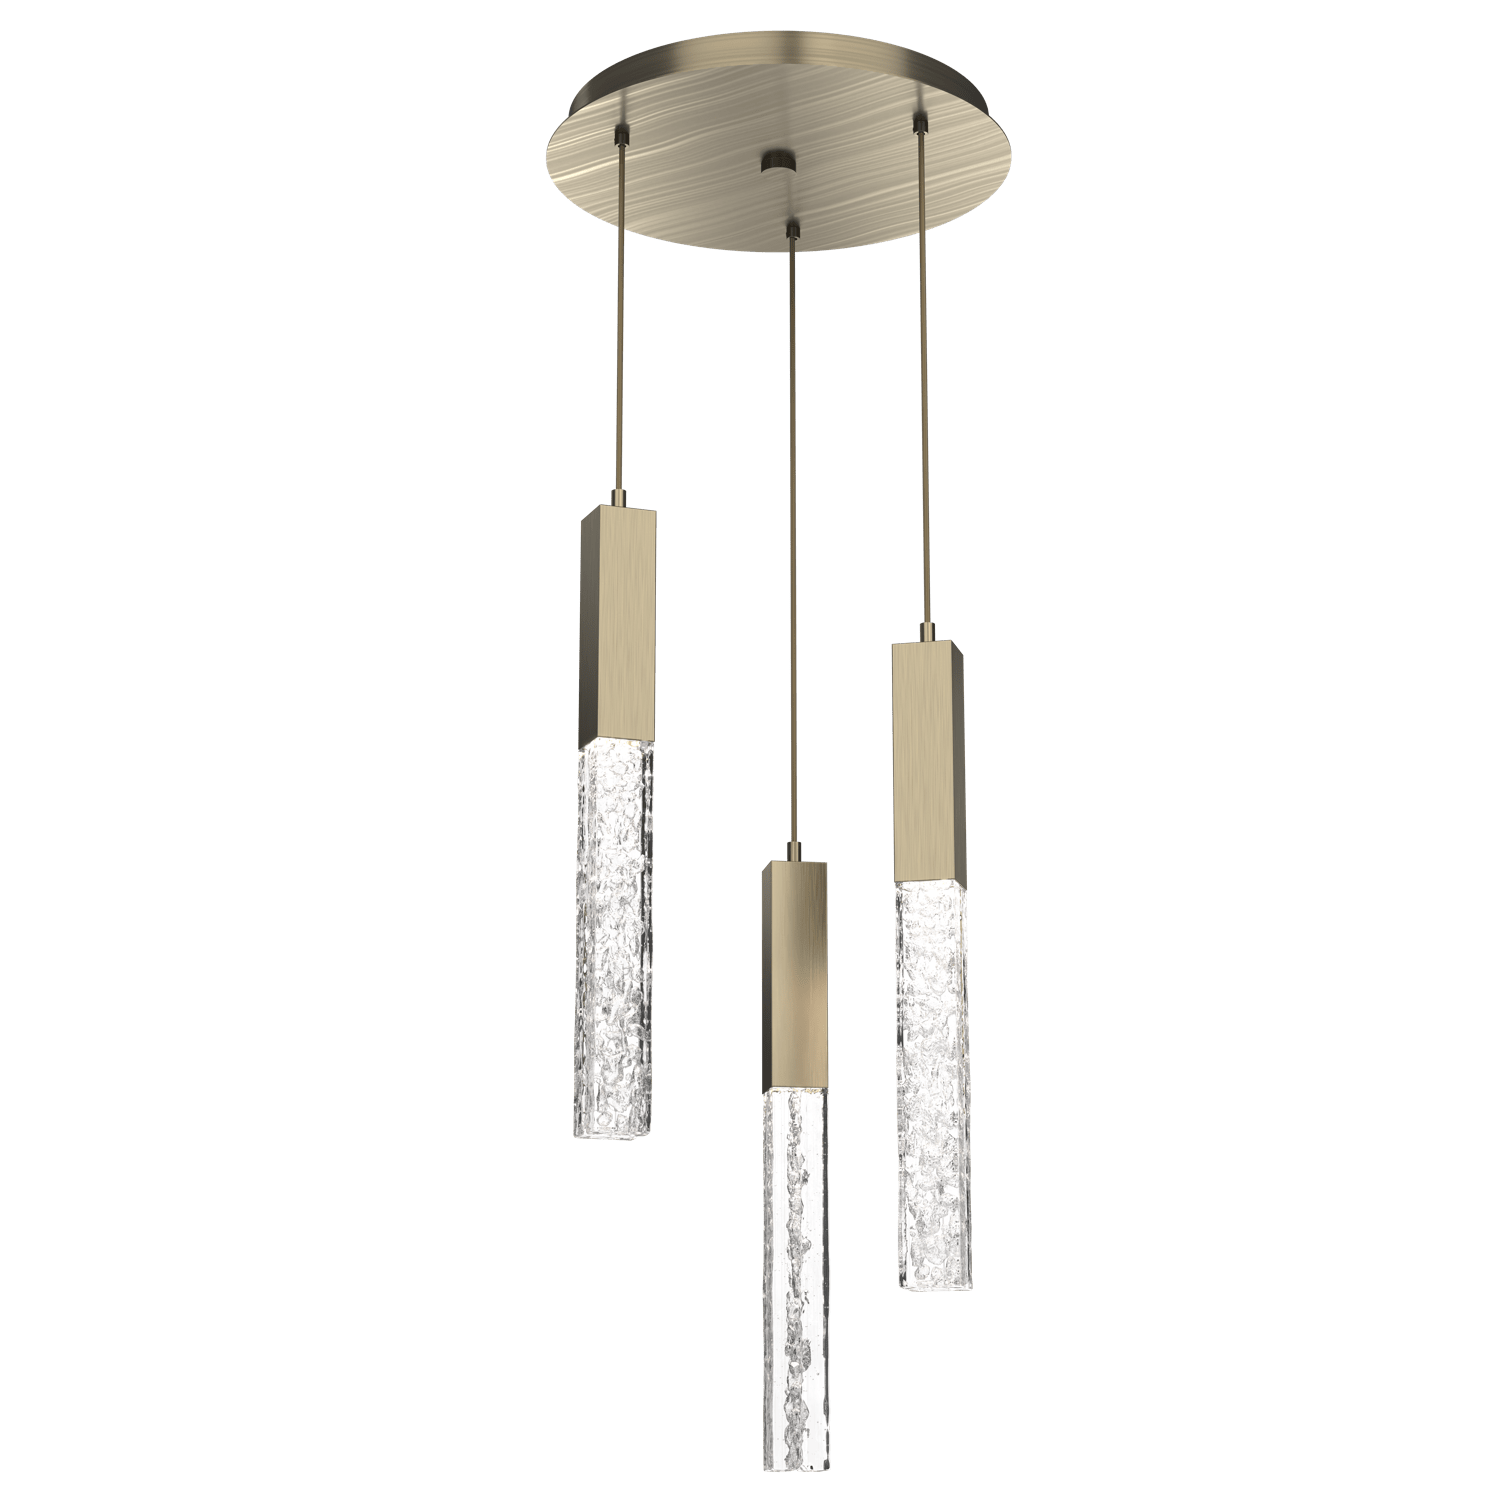 CHB0060-03-HB-GC-Hammerton-Studio-Axis-3-Light-Pendant-Chandelier-with-Heritage-Brass-finish-and-clear-cast-glass-and-LED-lamping